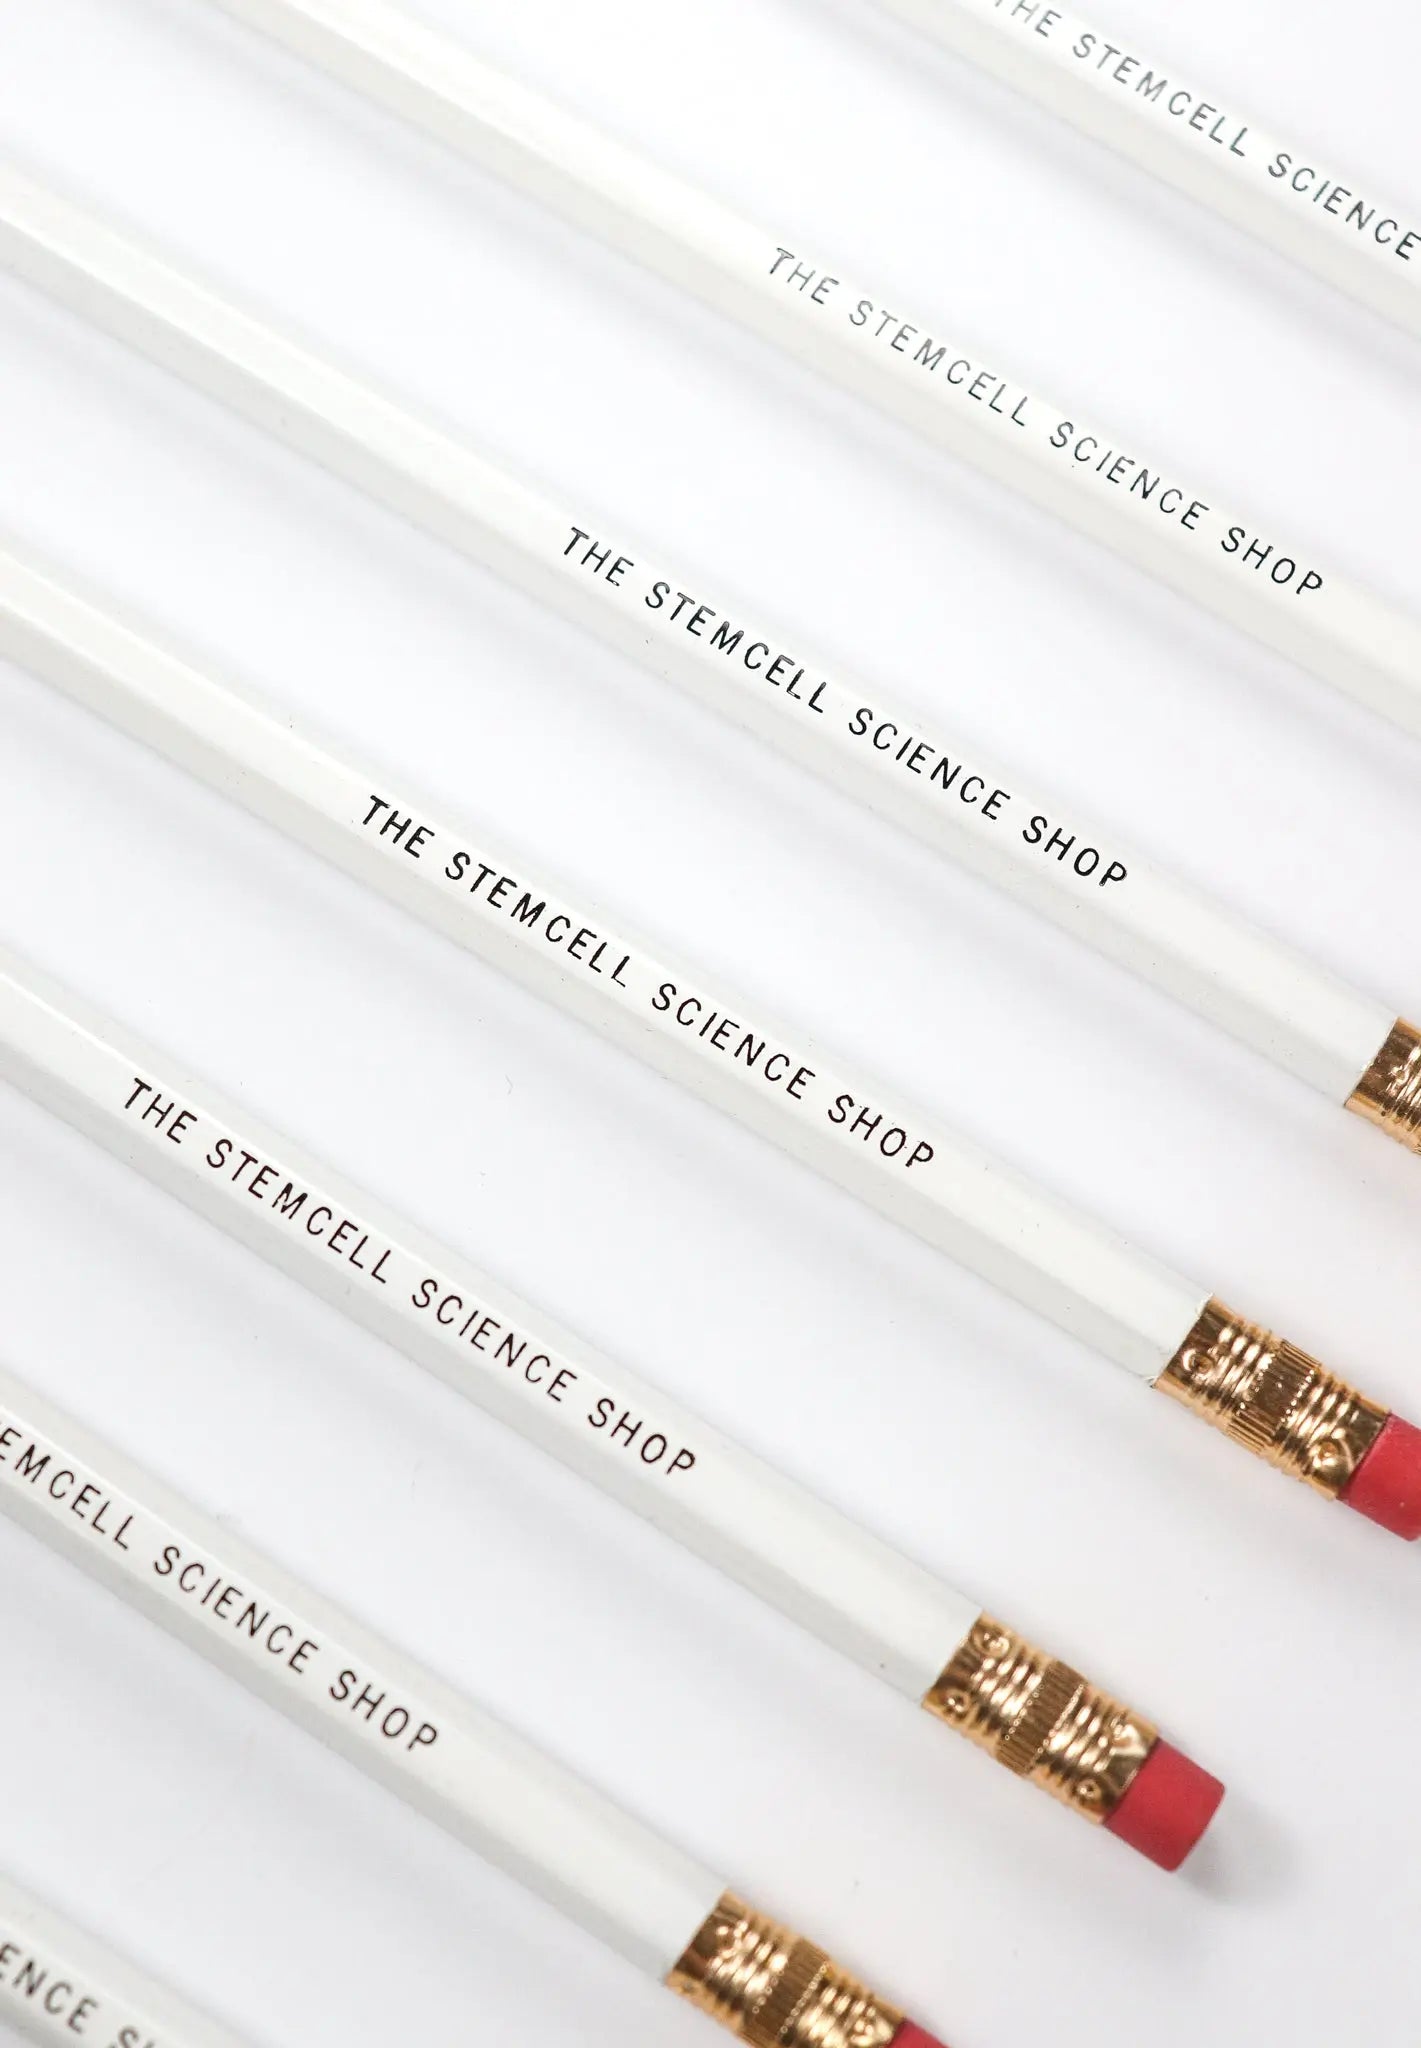 Science Pencil - THE STEMCELL SCIENCE SHOP